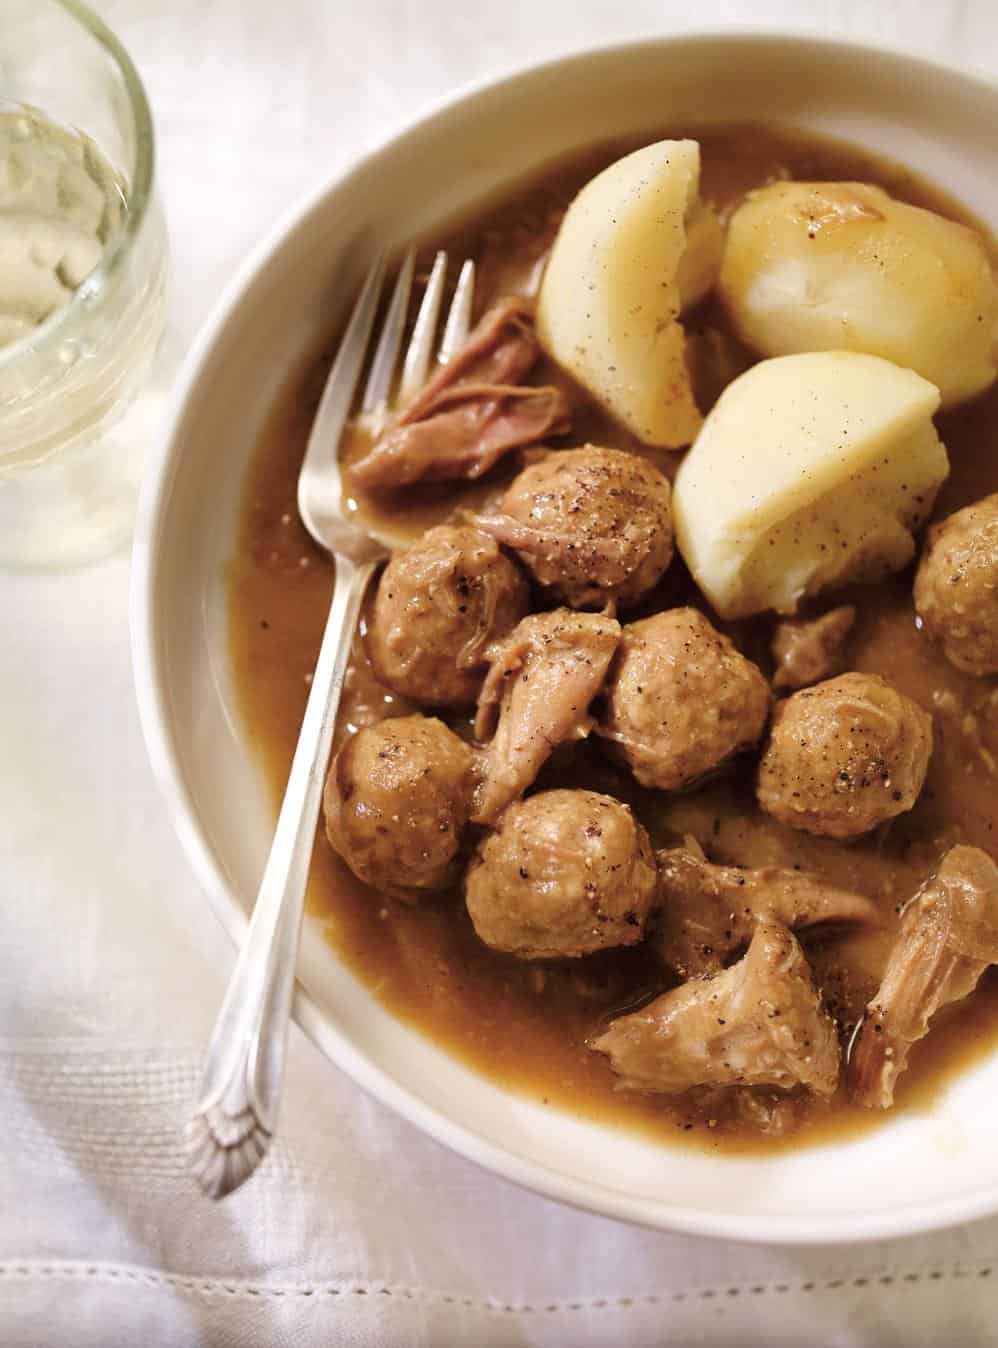  Warm up with a bowl of this rich and savoury pork stew